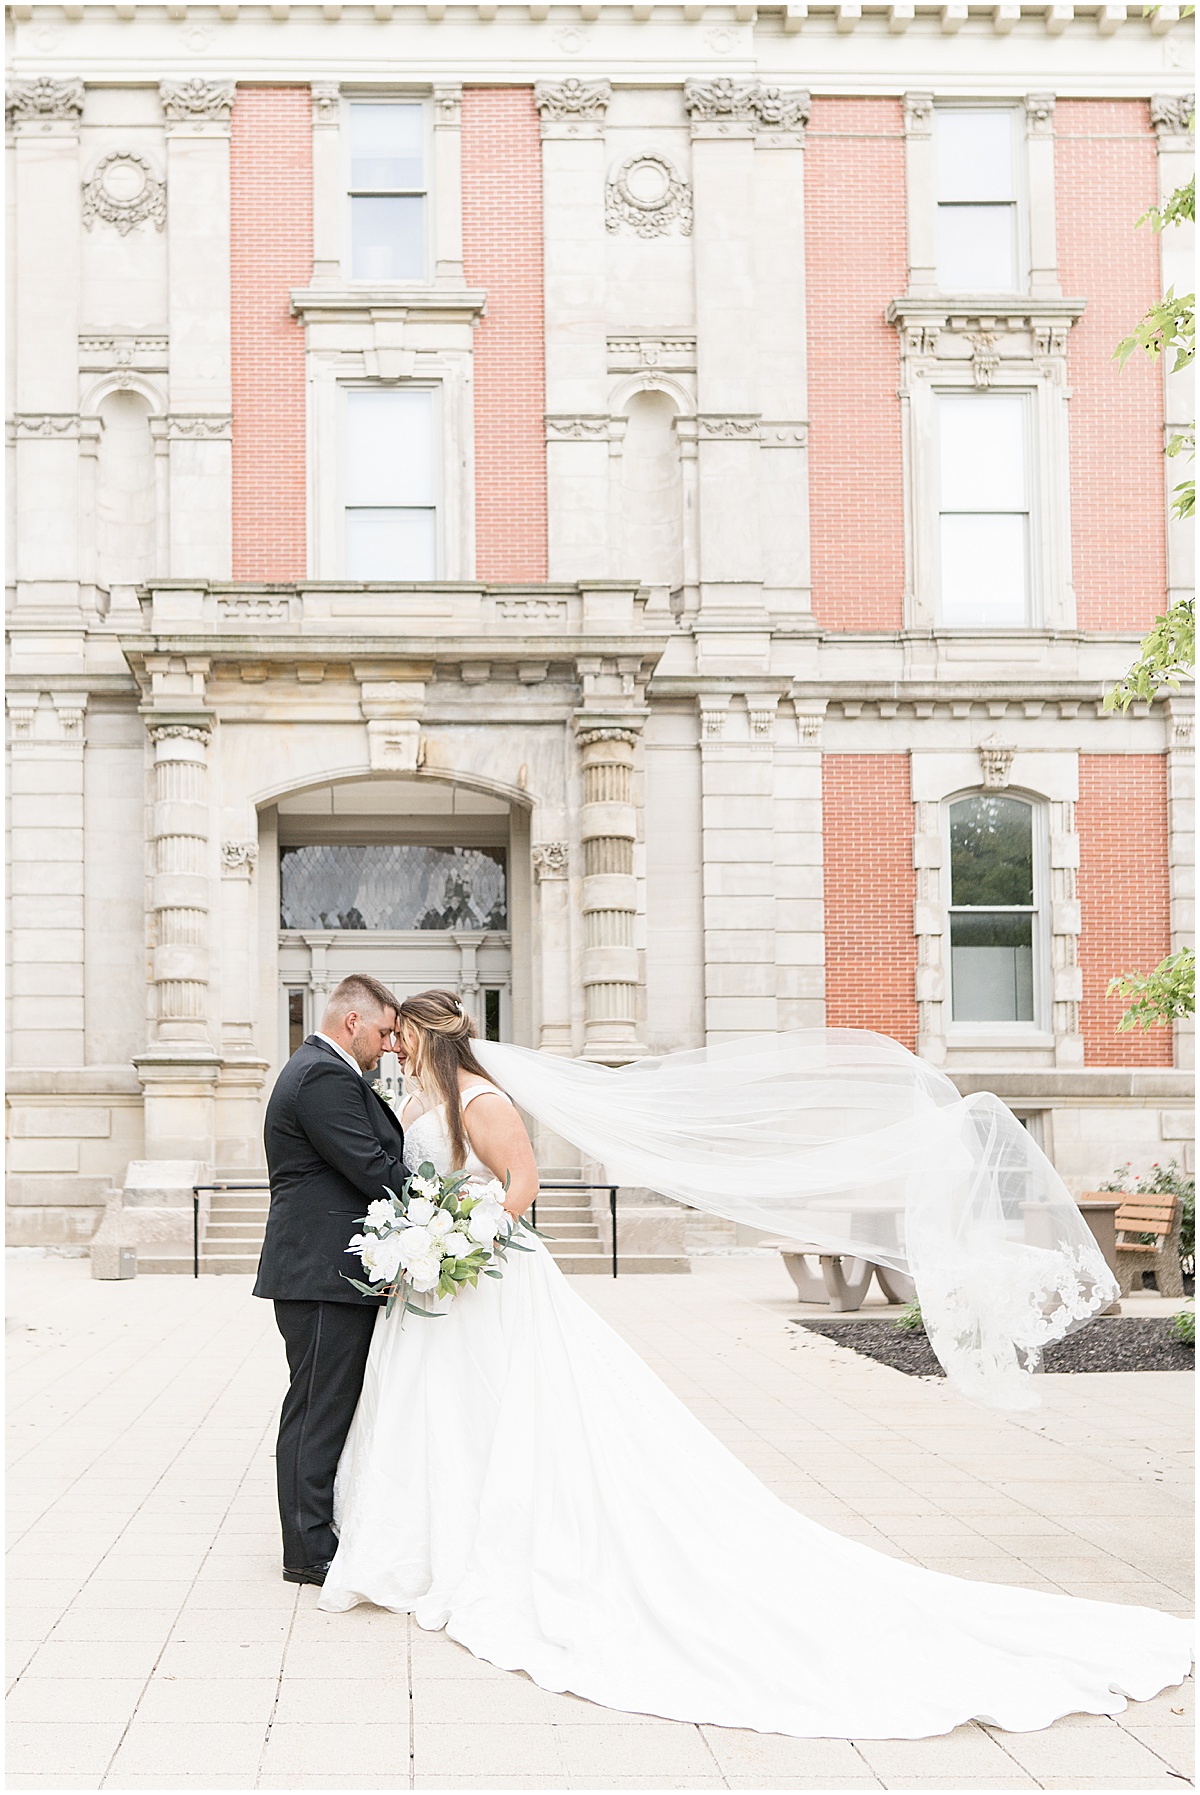 Bride and groom in front of doorway during wedding photos at Hamilton County Courthouse in downtown Noblesville, Indiana 